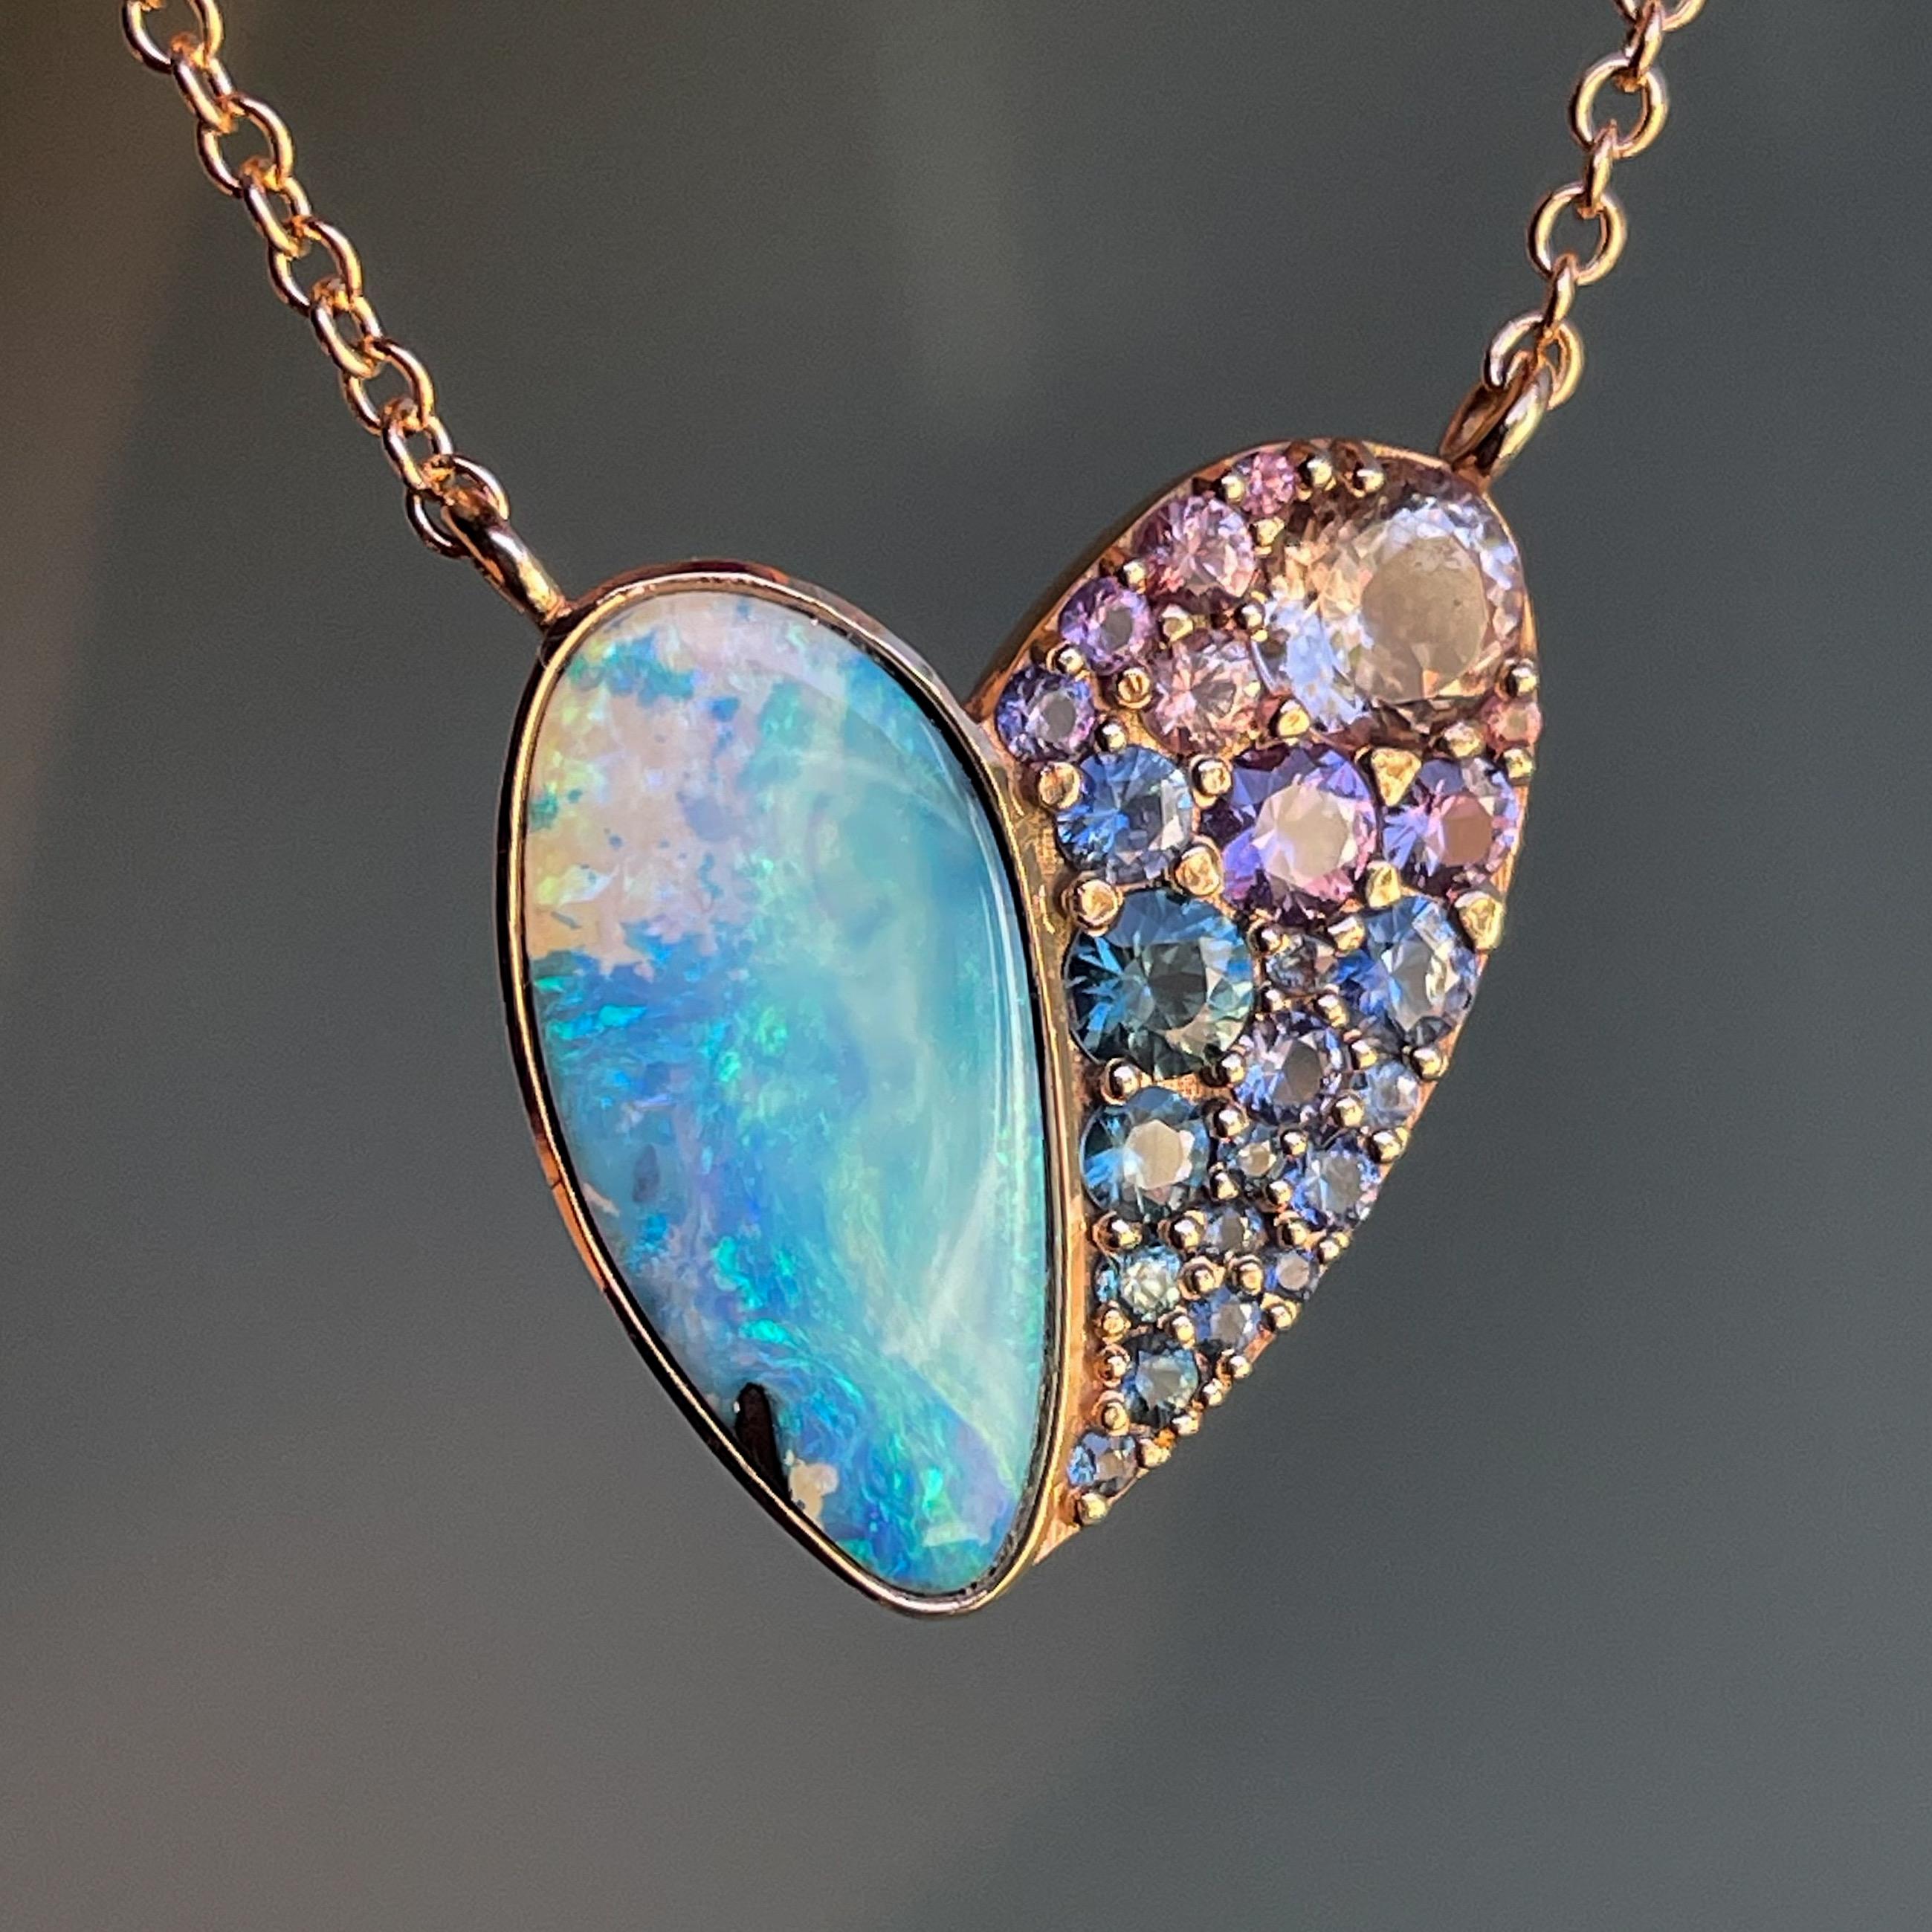 Women's NIXIN Jewelry Cobbled Heart Opal Necklace with Sapphires in 14k Rose Gold